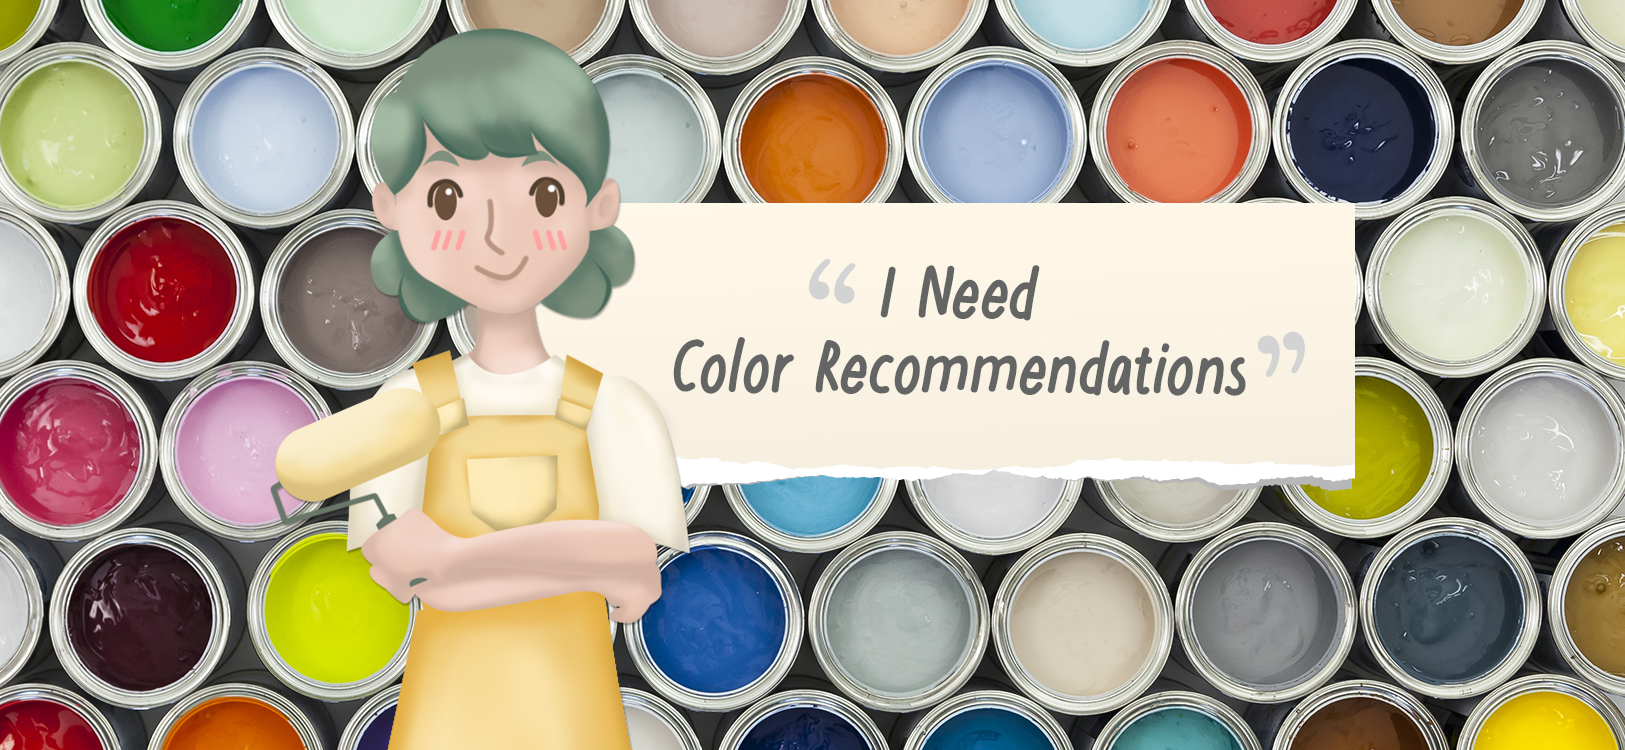 Paint TechTalk with Lettie: I Need Color Recommendations